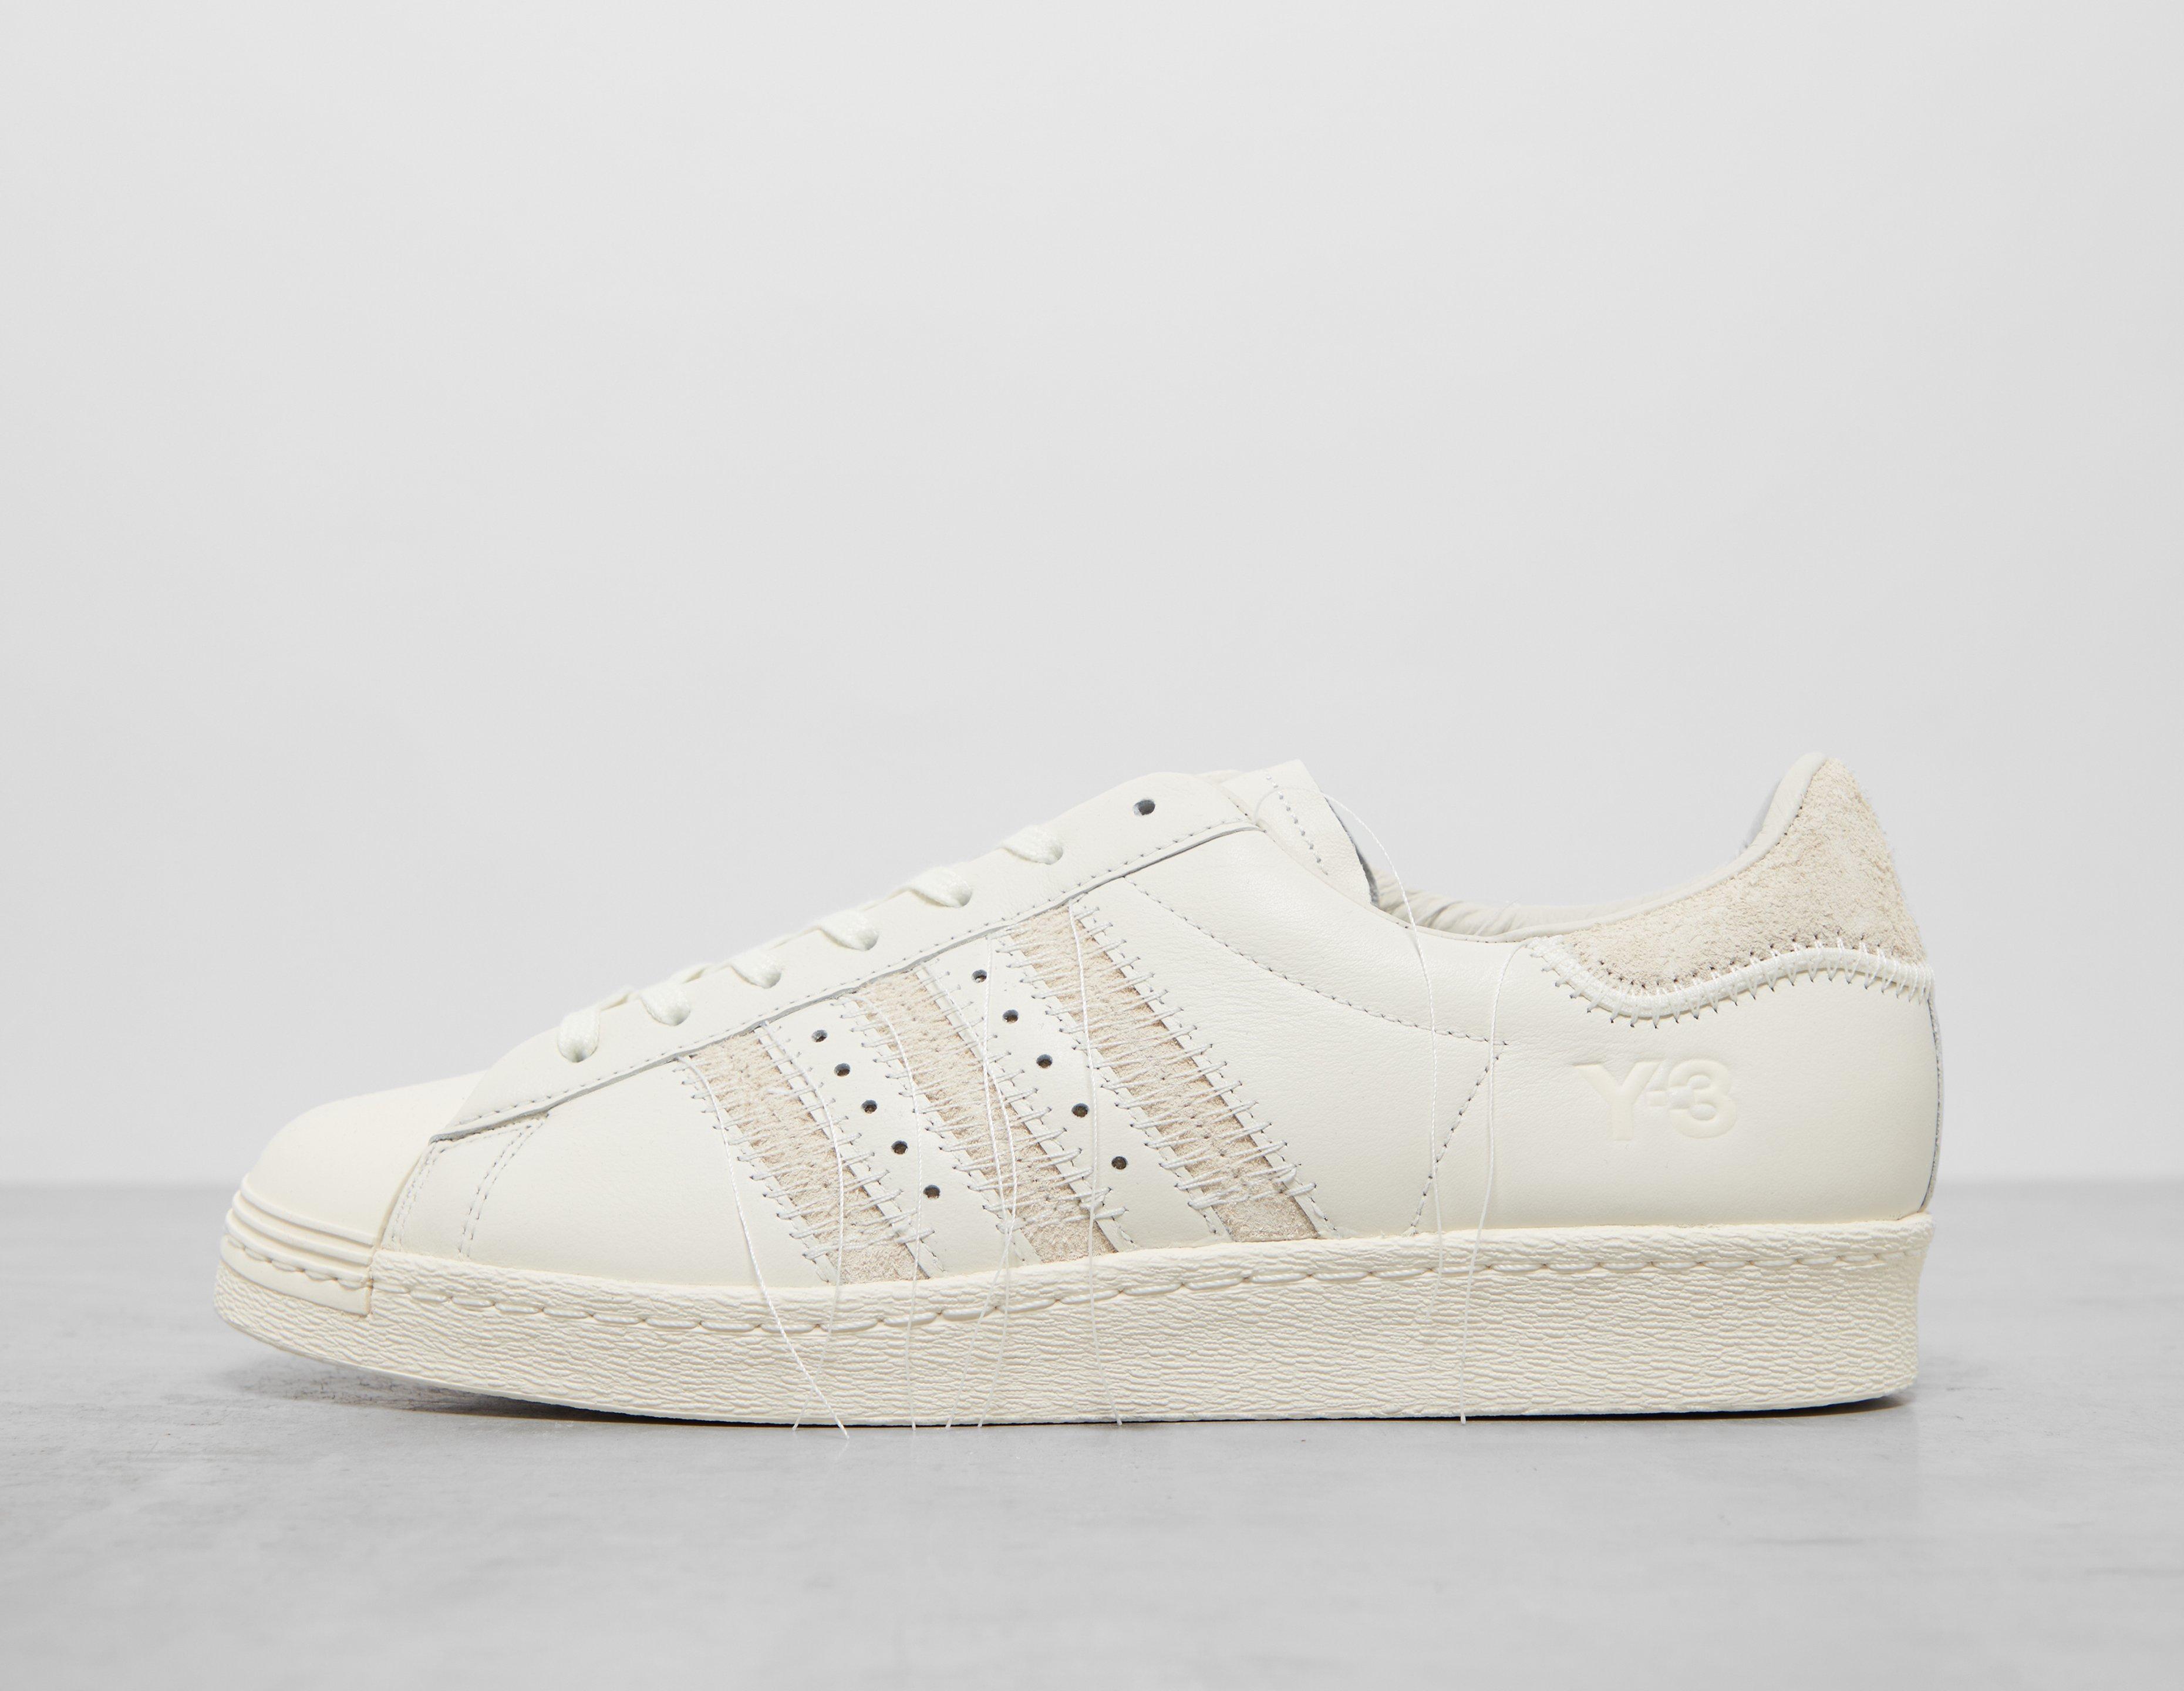 The adidas Superstar Vulc ADV Features a Slimmer Sole and Improved